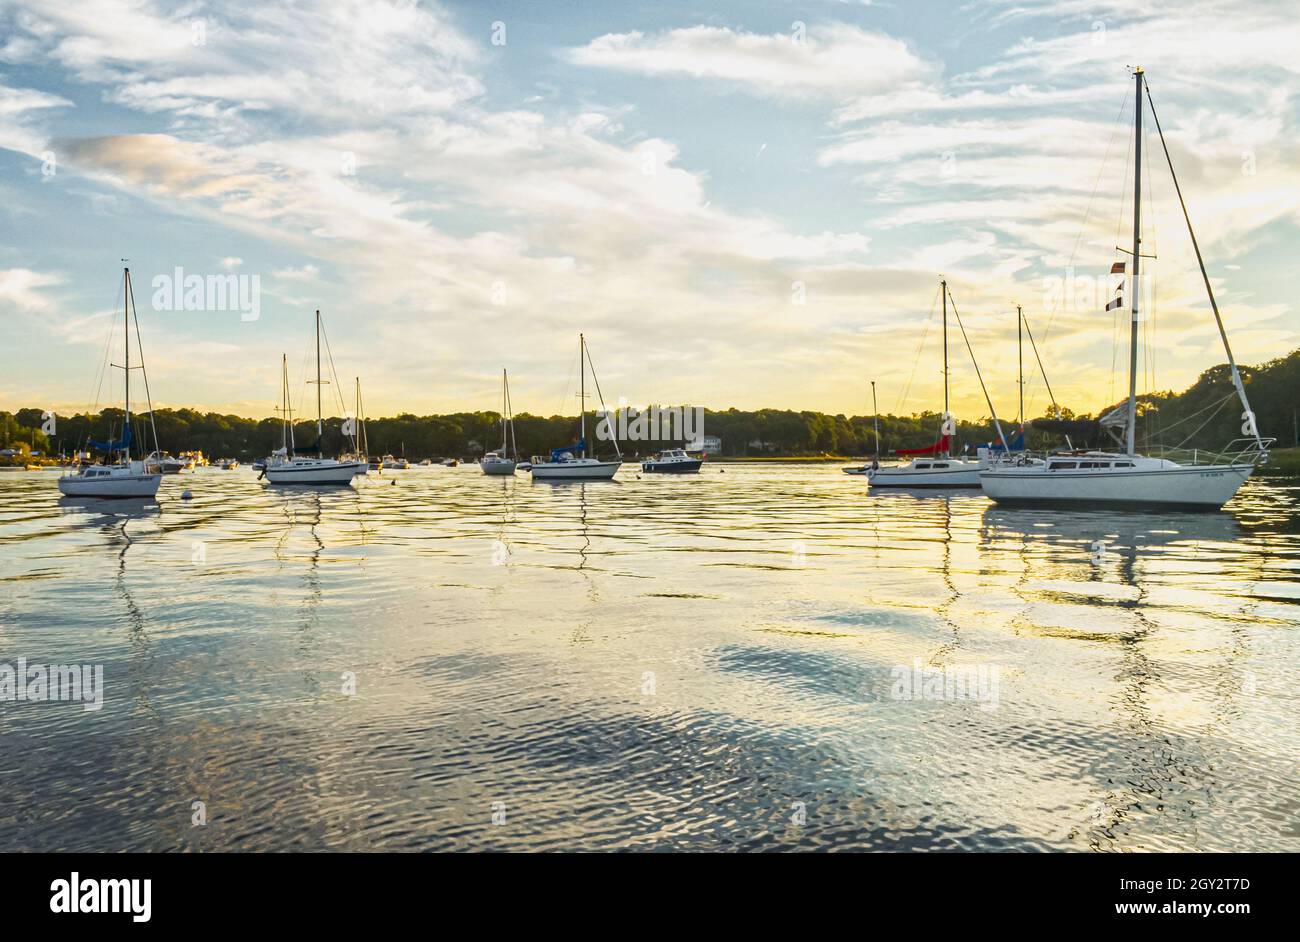 Sailboats moored in a placid harbor at sundown. Long Island, New York. Copy space. Stock Photo